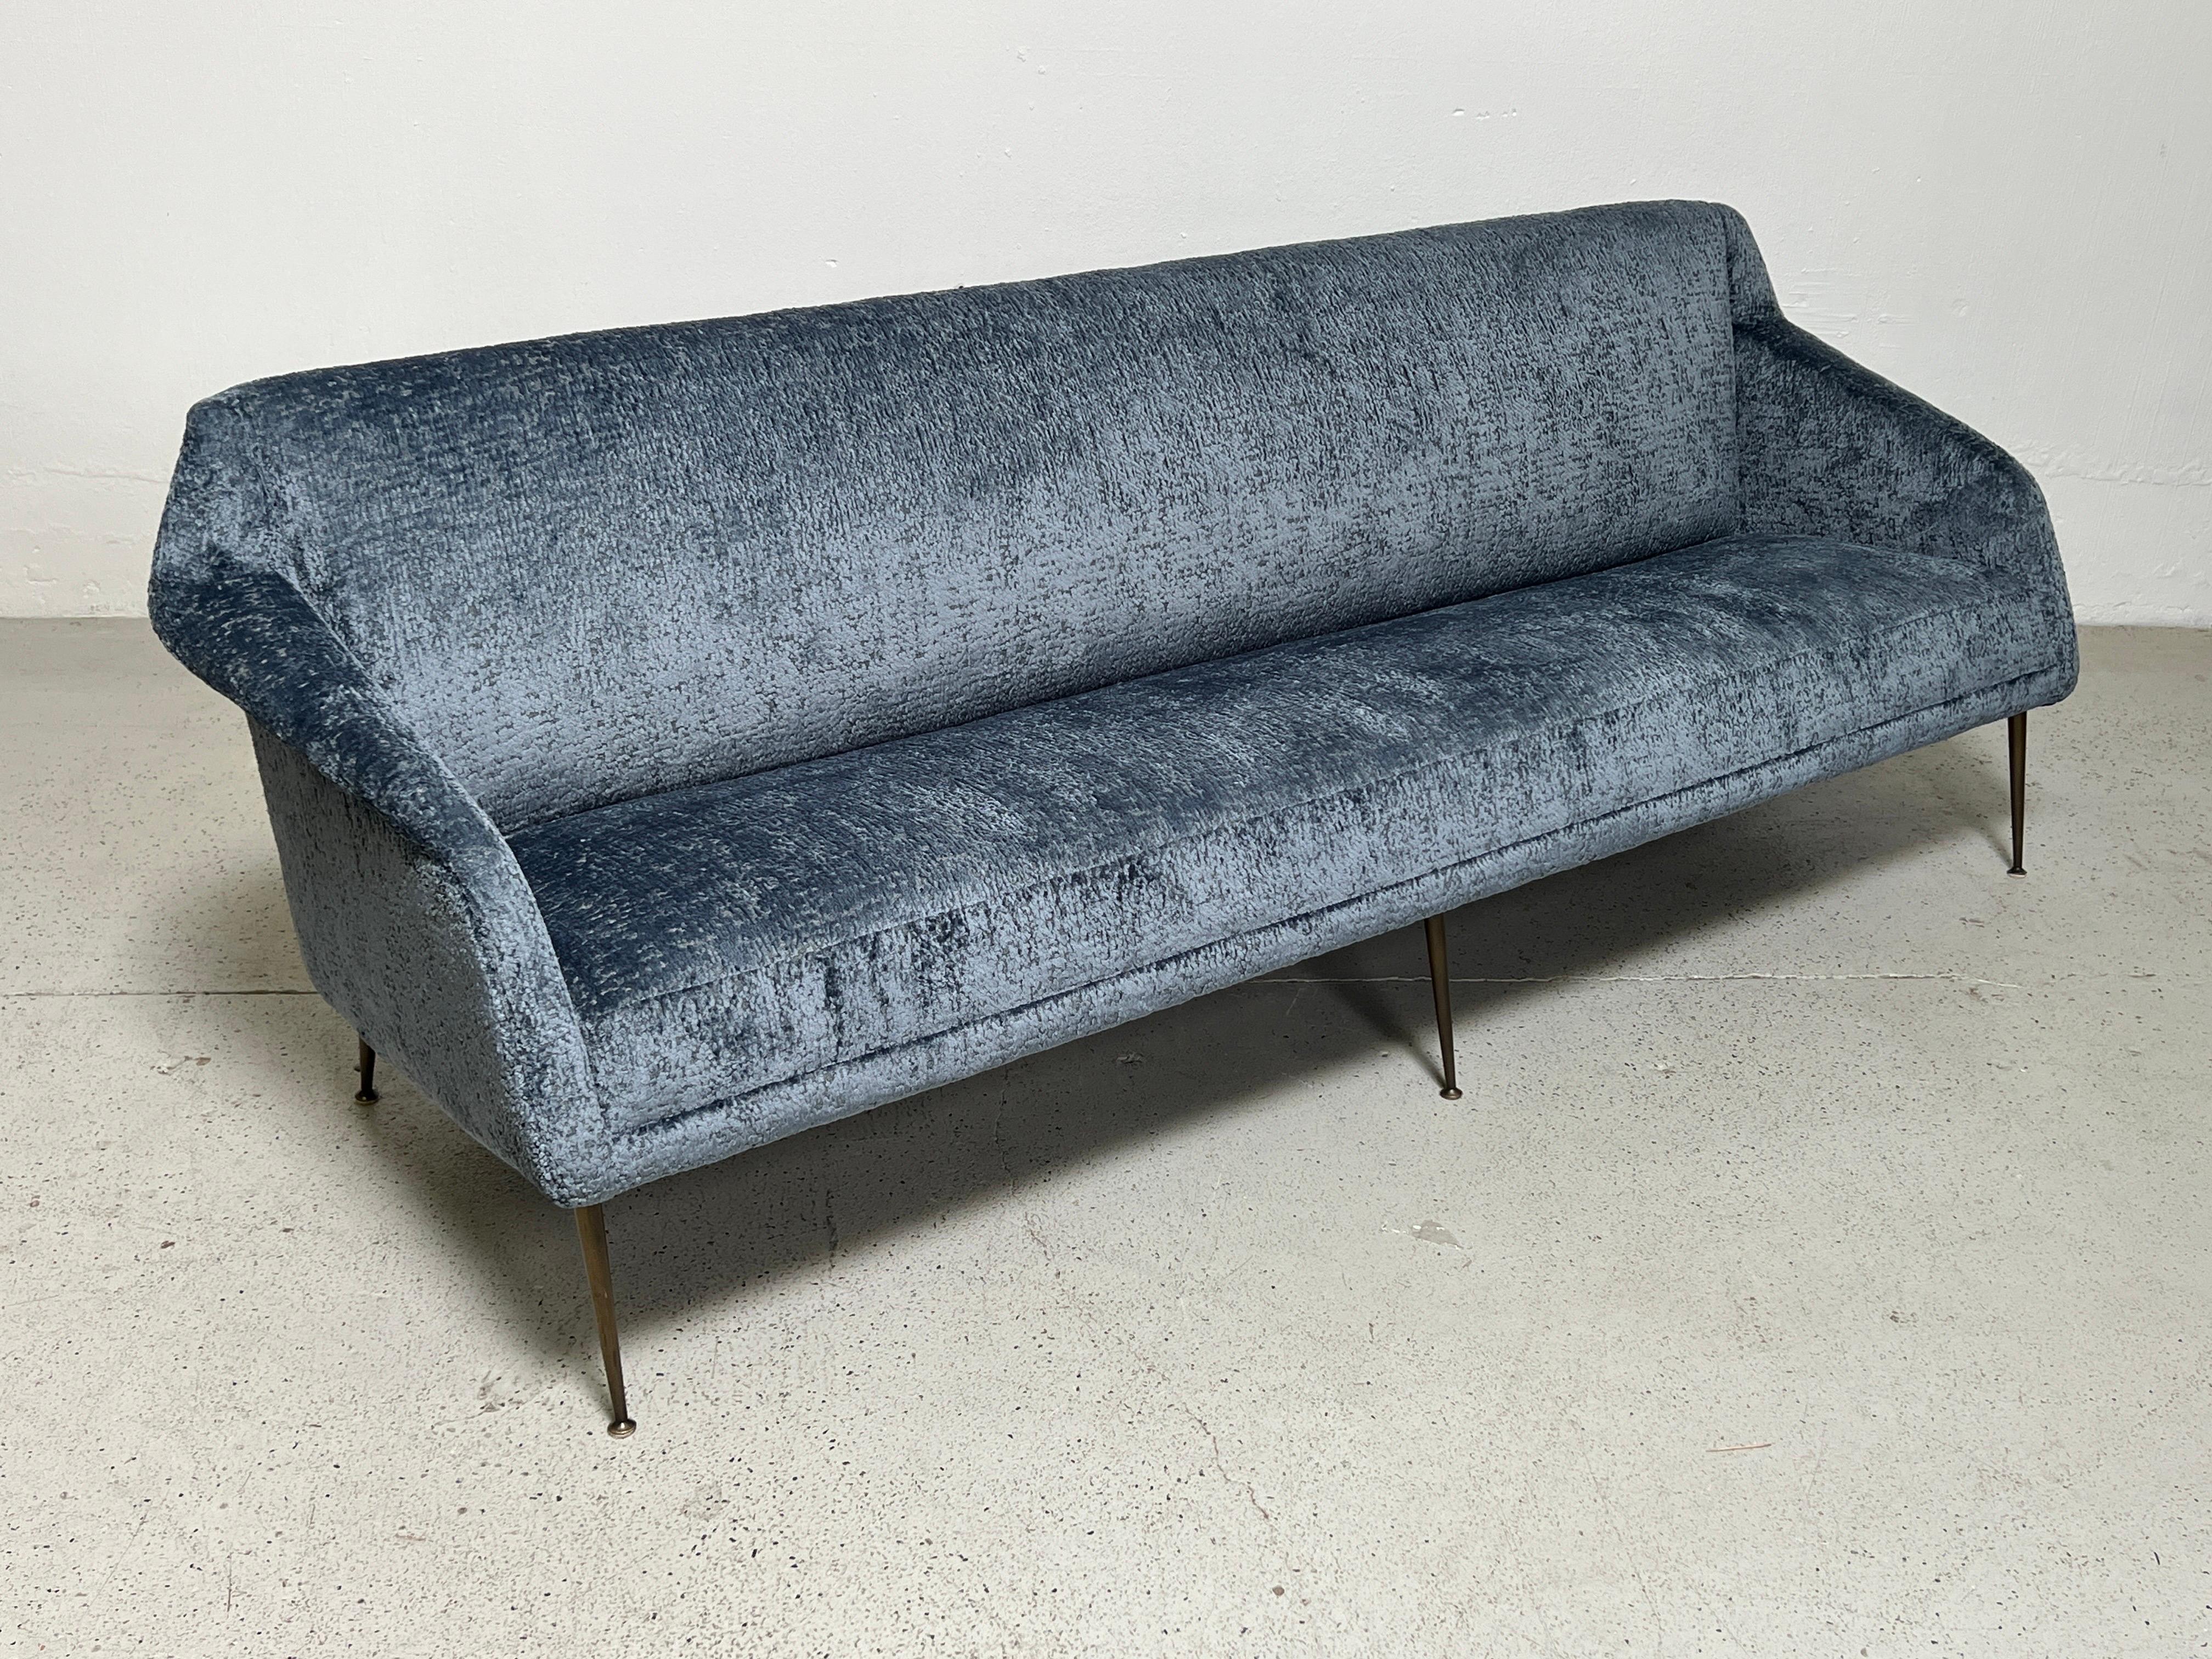 A rare sofa designed by Carlo de Carli for Singer and Sons. Fully restored and upholstered in Holly Hunt / Plushy / Teal fabric. Matching chair available separately. 